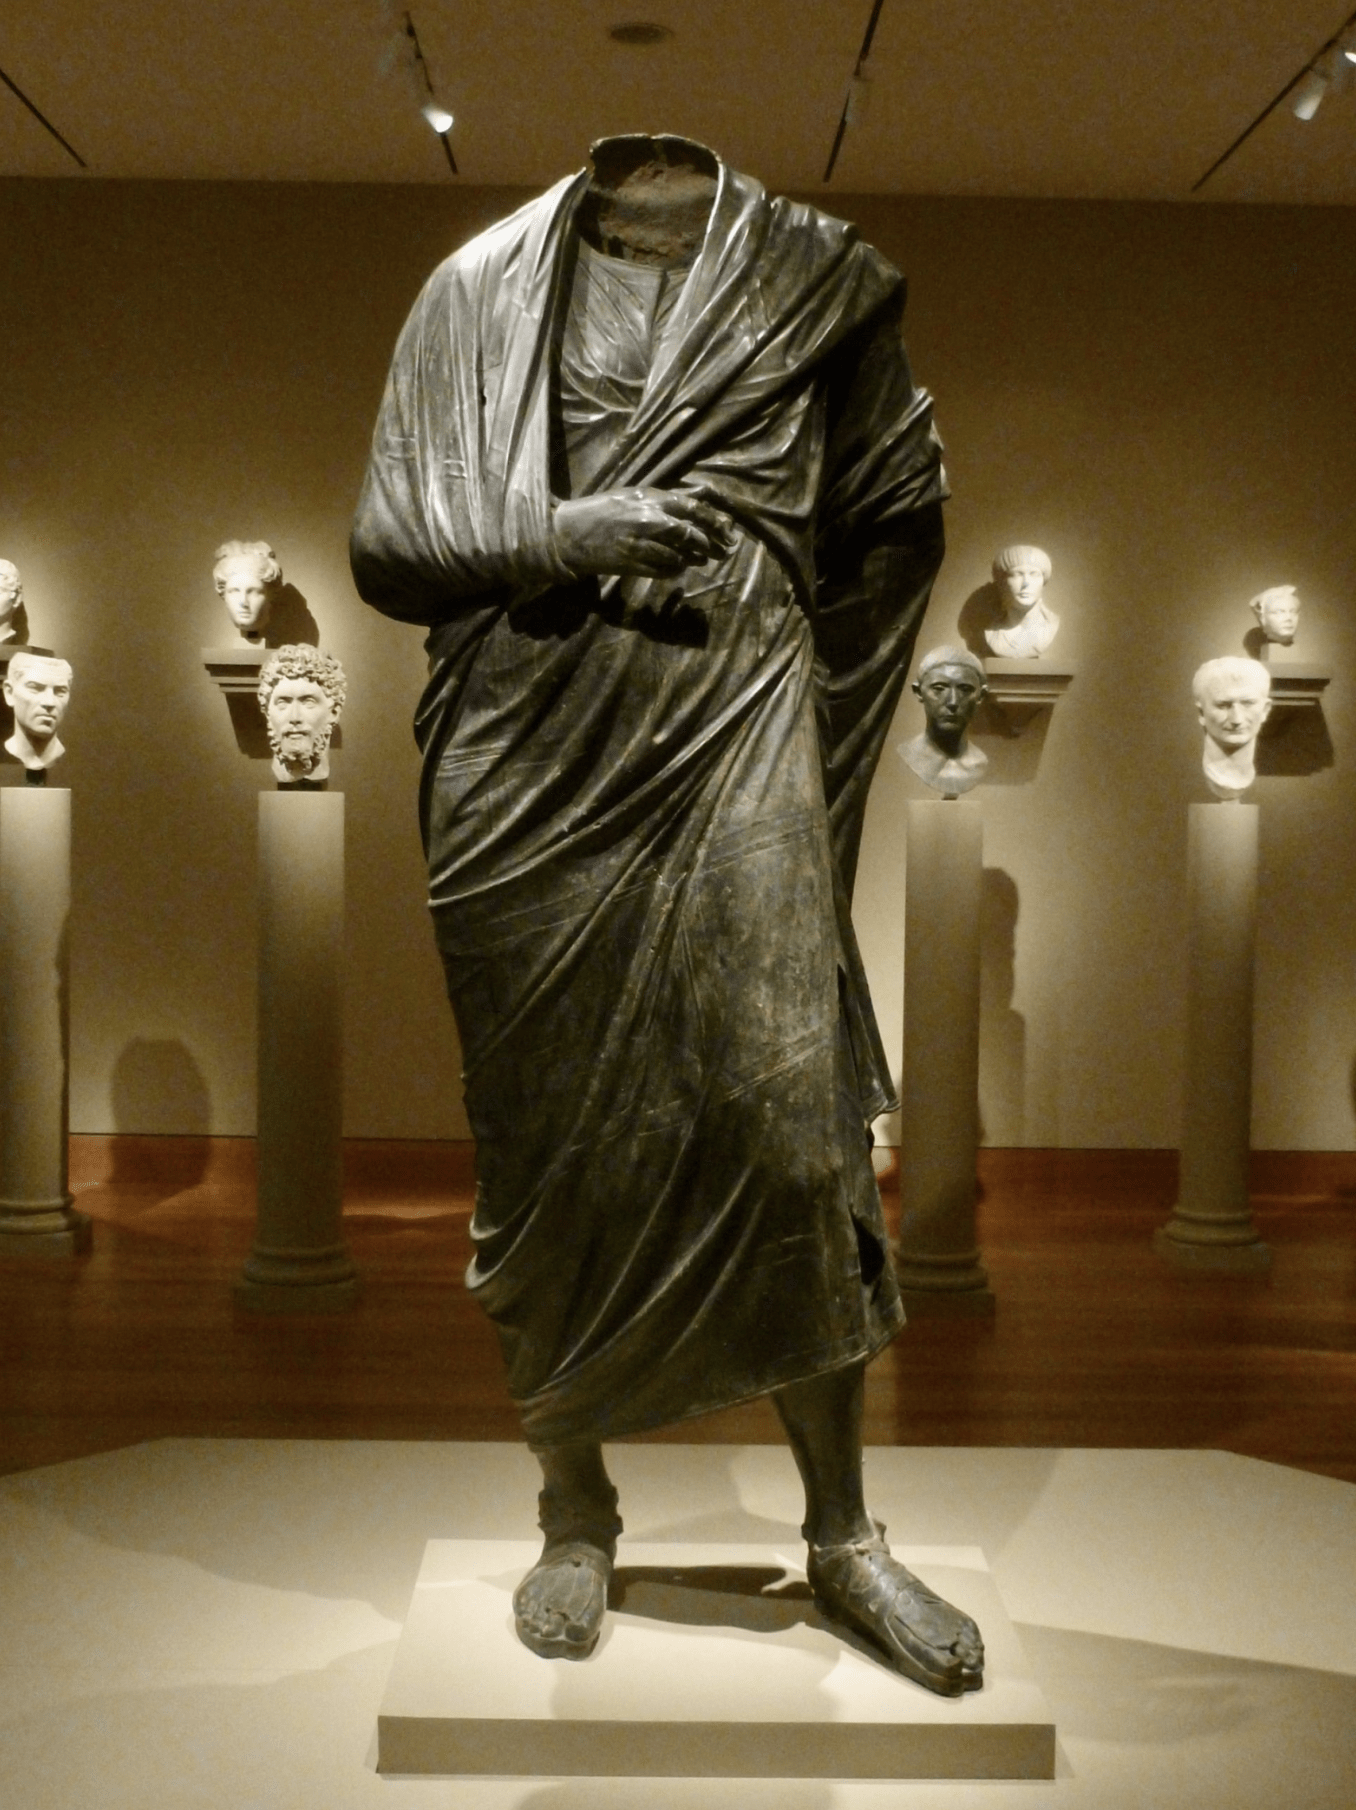 The Emperor as Philosopher, probably Marcus Aurelius, circa 180–200 CE. Turkey, Bubon(?) (in Lycia), Roman, late 2nd Century. Bronze, hollow cast in several pieces and joined; overall: 76 inches. The Cleveland Museum of Art, Leonard C. Hanna, Jr. Fund 1986.5 (photo Elizabeth Marlowe/Hyperallergic)